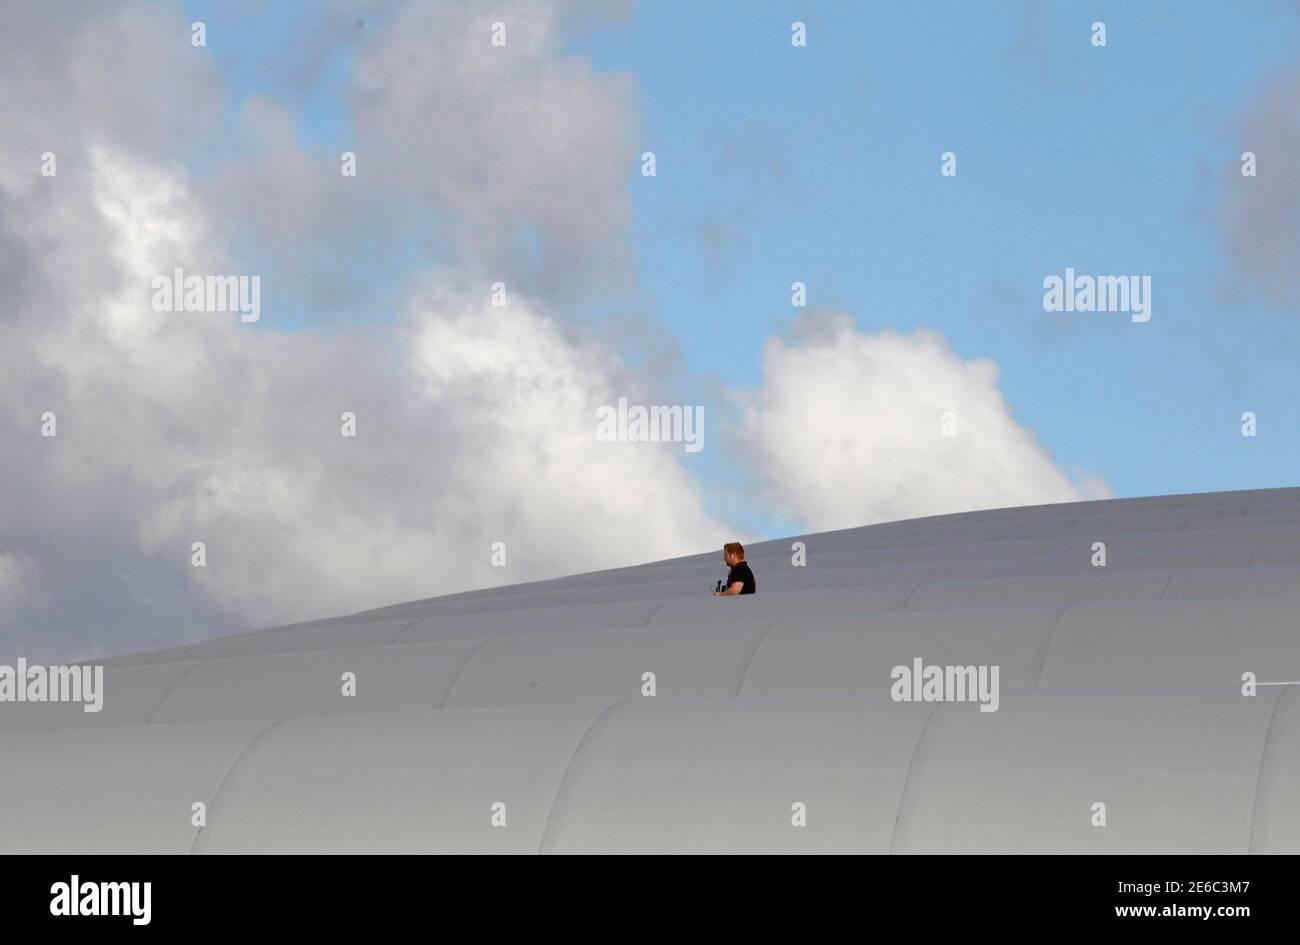 A worker stands on the roof of the Olympic water polo arena in Olympic Park, Stratford, east London, July 19, 2012. The 2012 London Olympic Games will begin in just over a week.  REUTERS/Andrew Winning (BRITAIN - Tags: SPORT OLYMPICS) Stock Photo